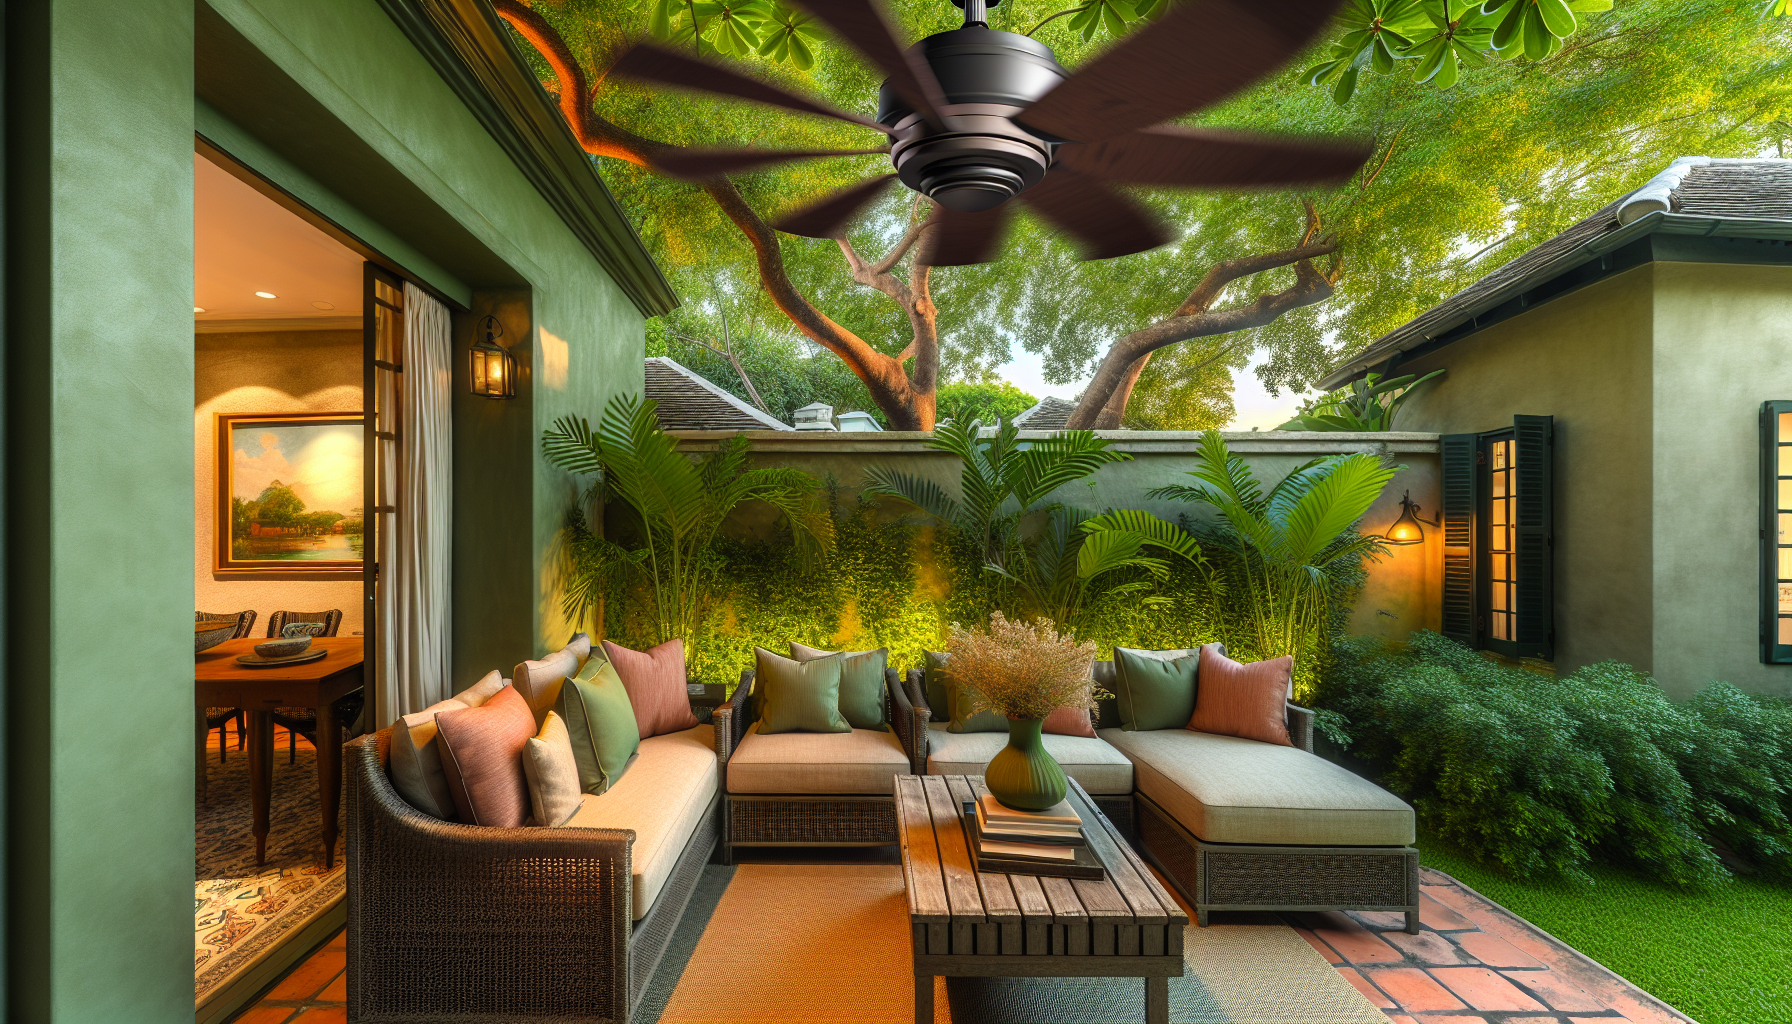 Outdoor patio with a ceiling fan providing a cooling breeze